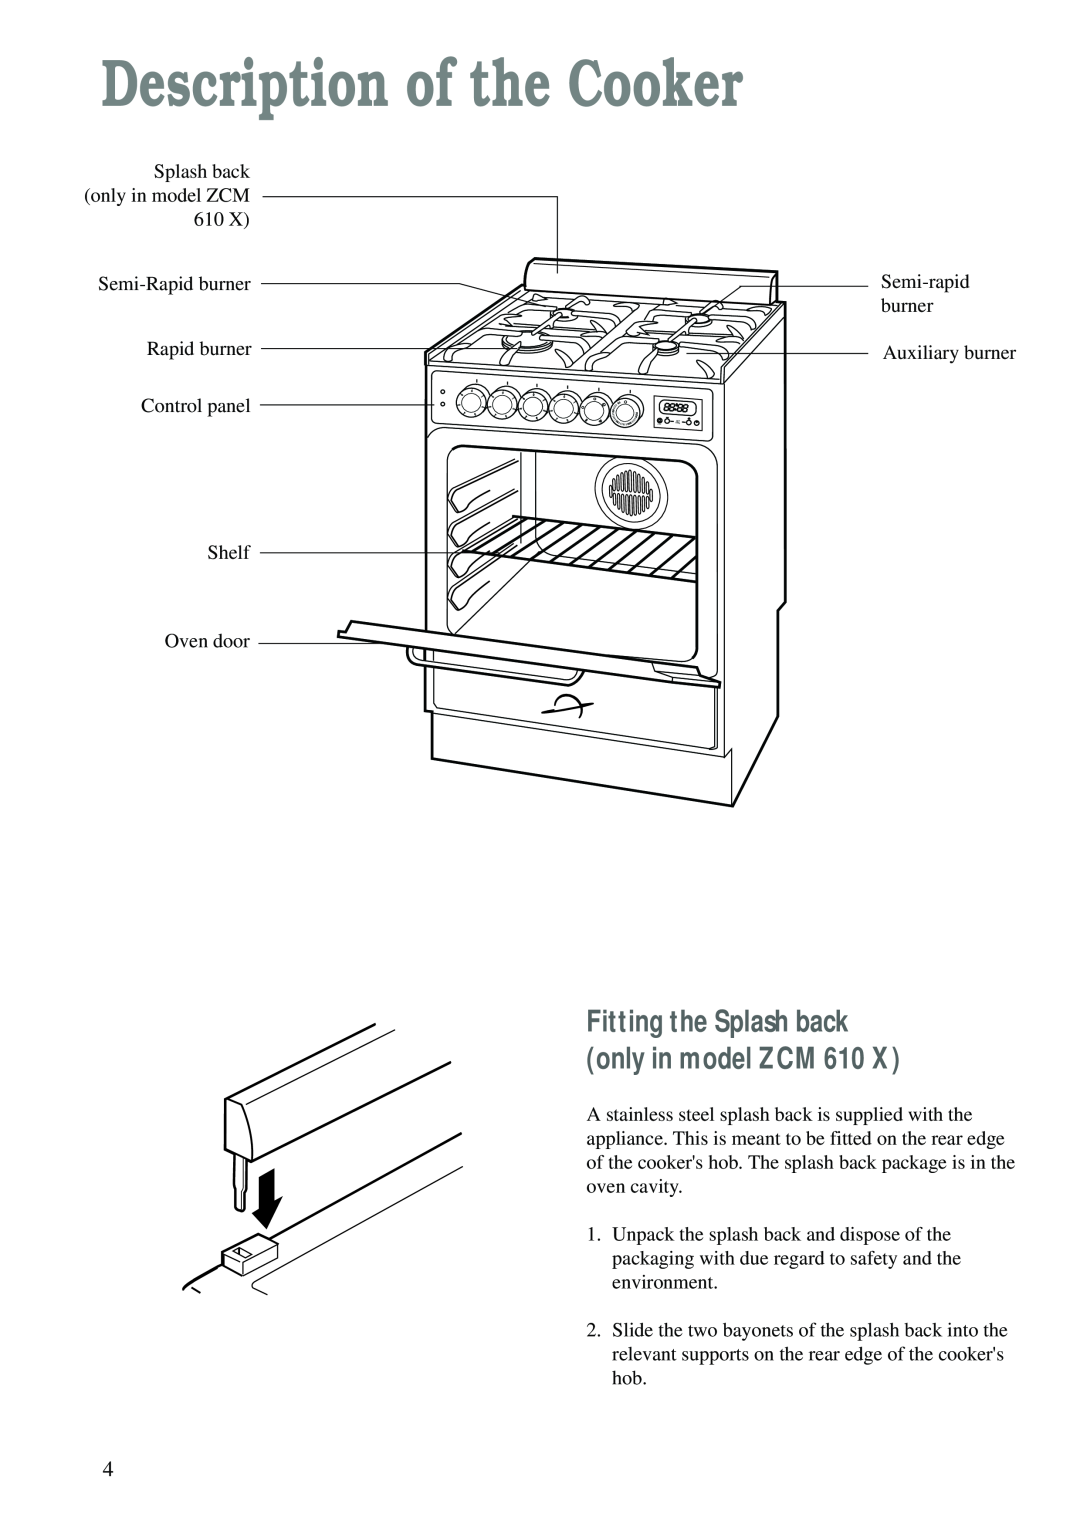 Zanussi ZCM 600 W, ZCM 610 X manual Description of the Cooker, Fitting the Splash back only in model ZCM 